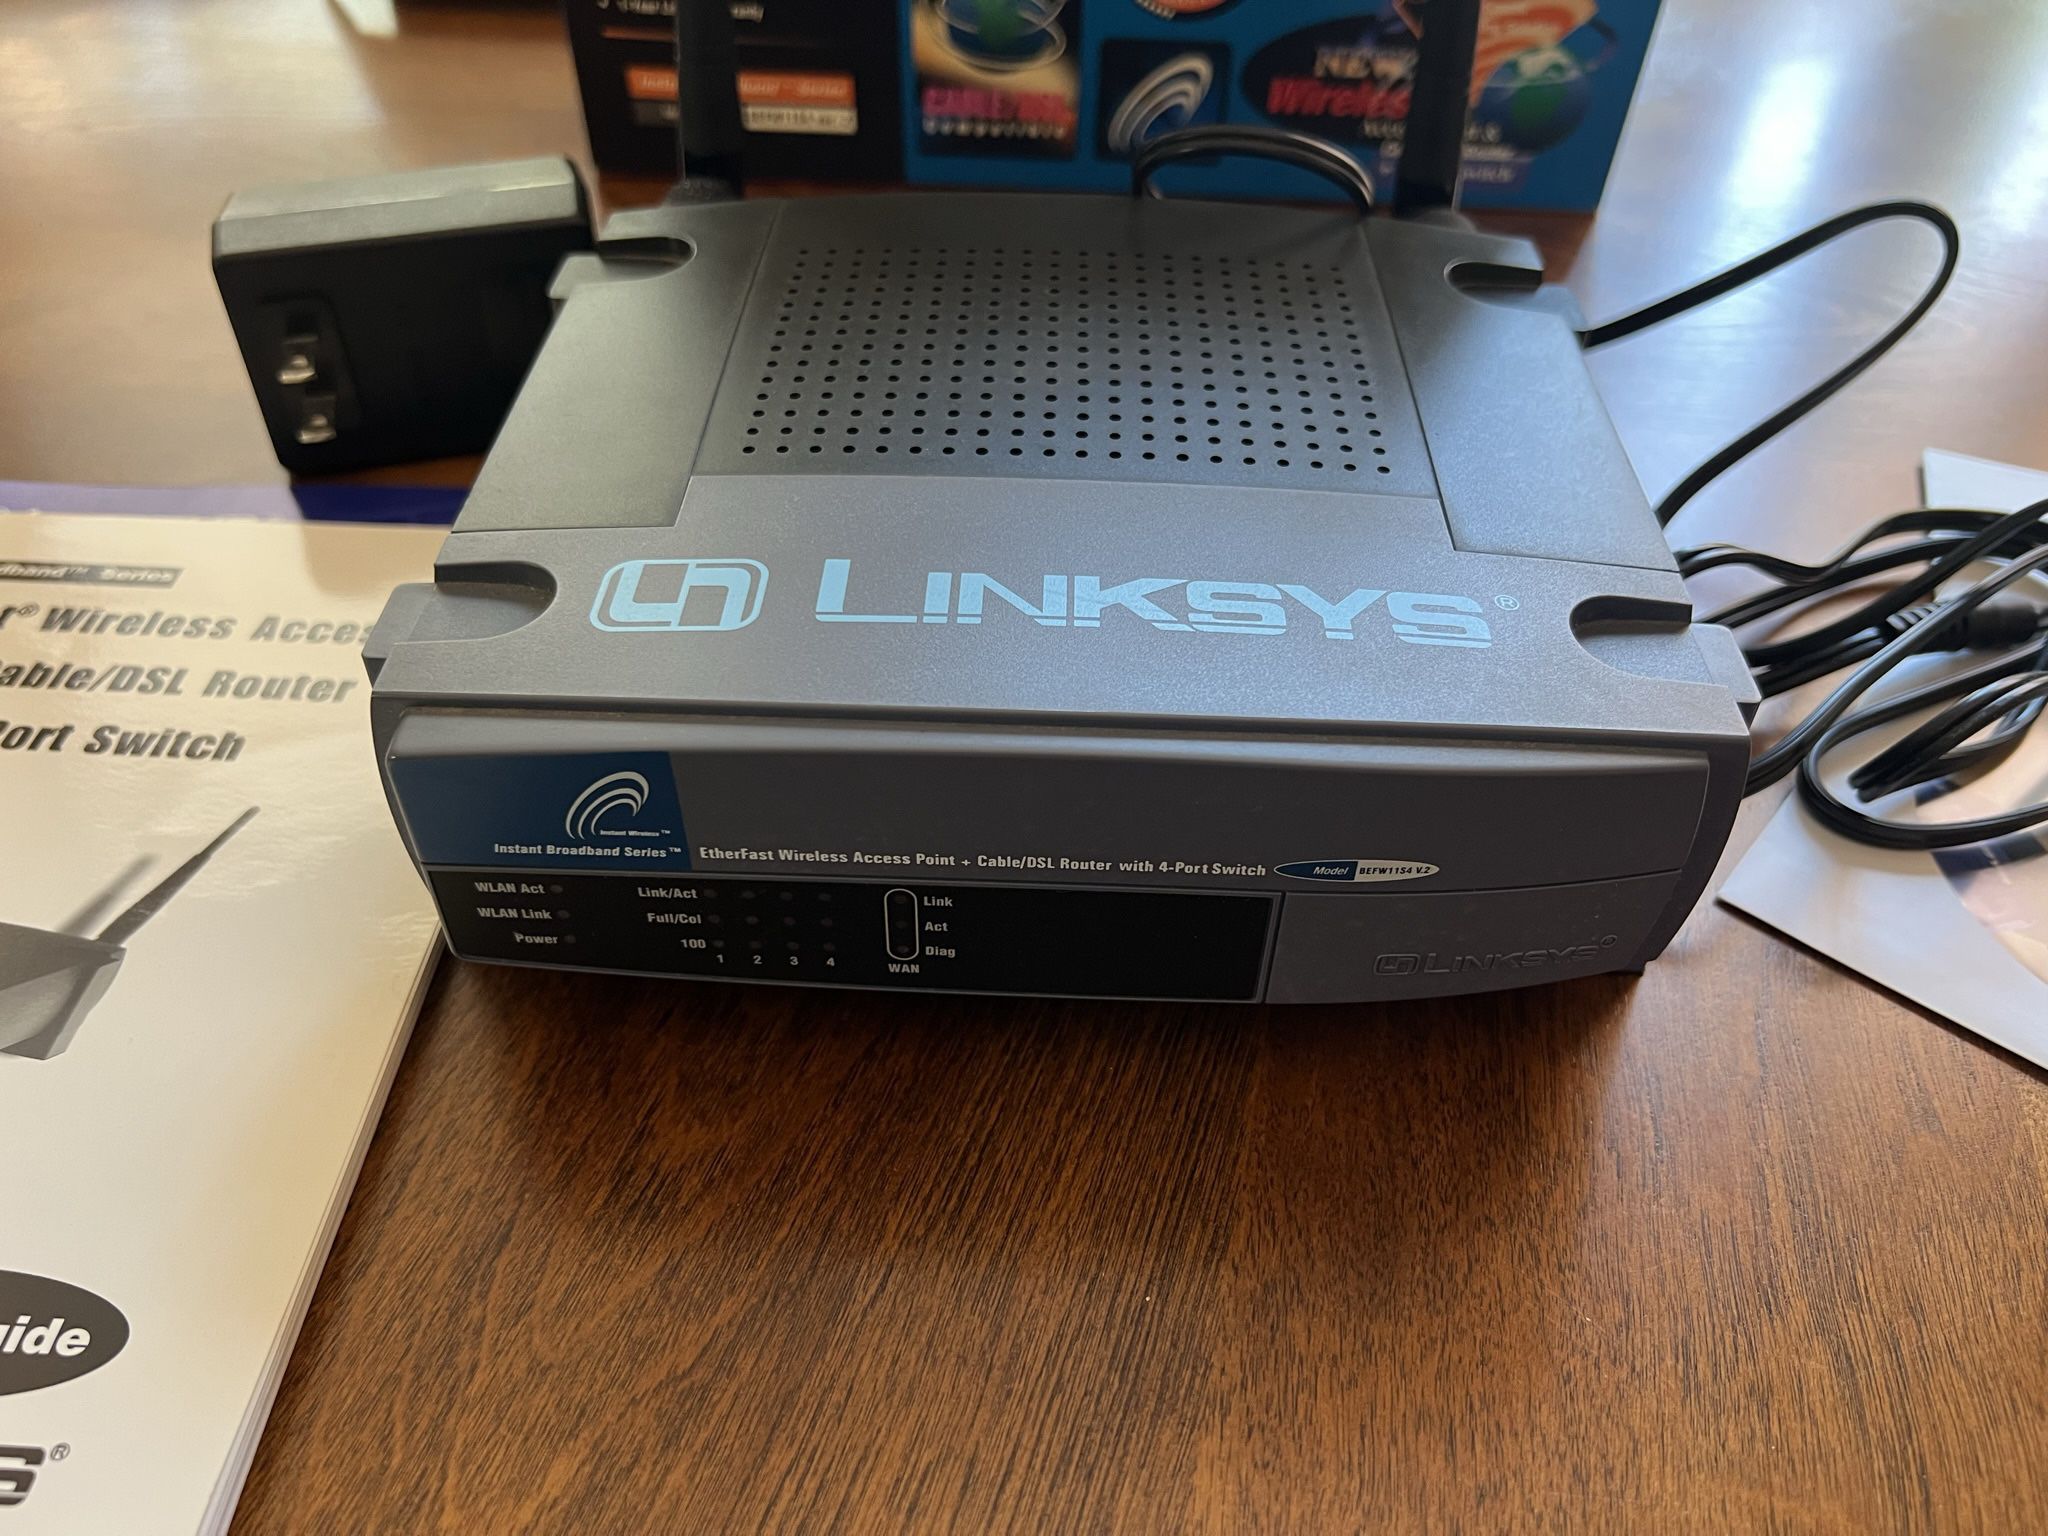 Linksys EtherFast Wireless AP + Cable / DSL Router BEFW11S4 Ver. 2 